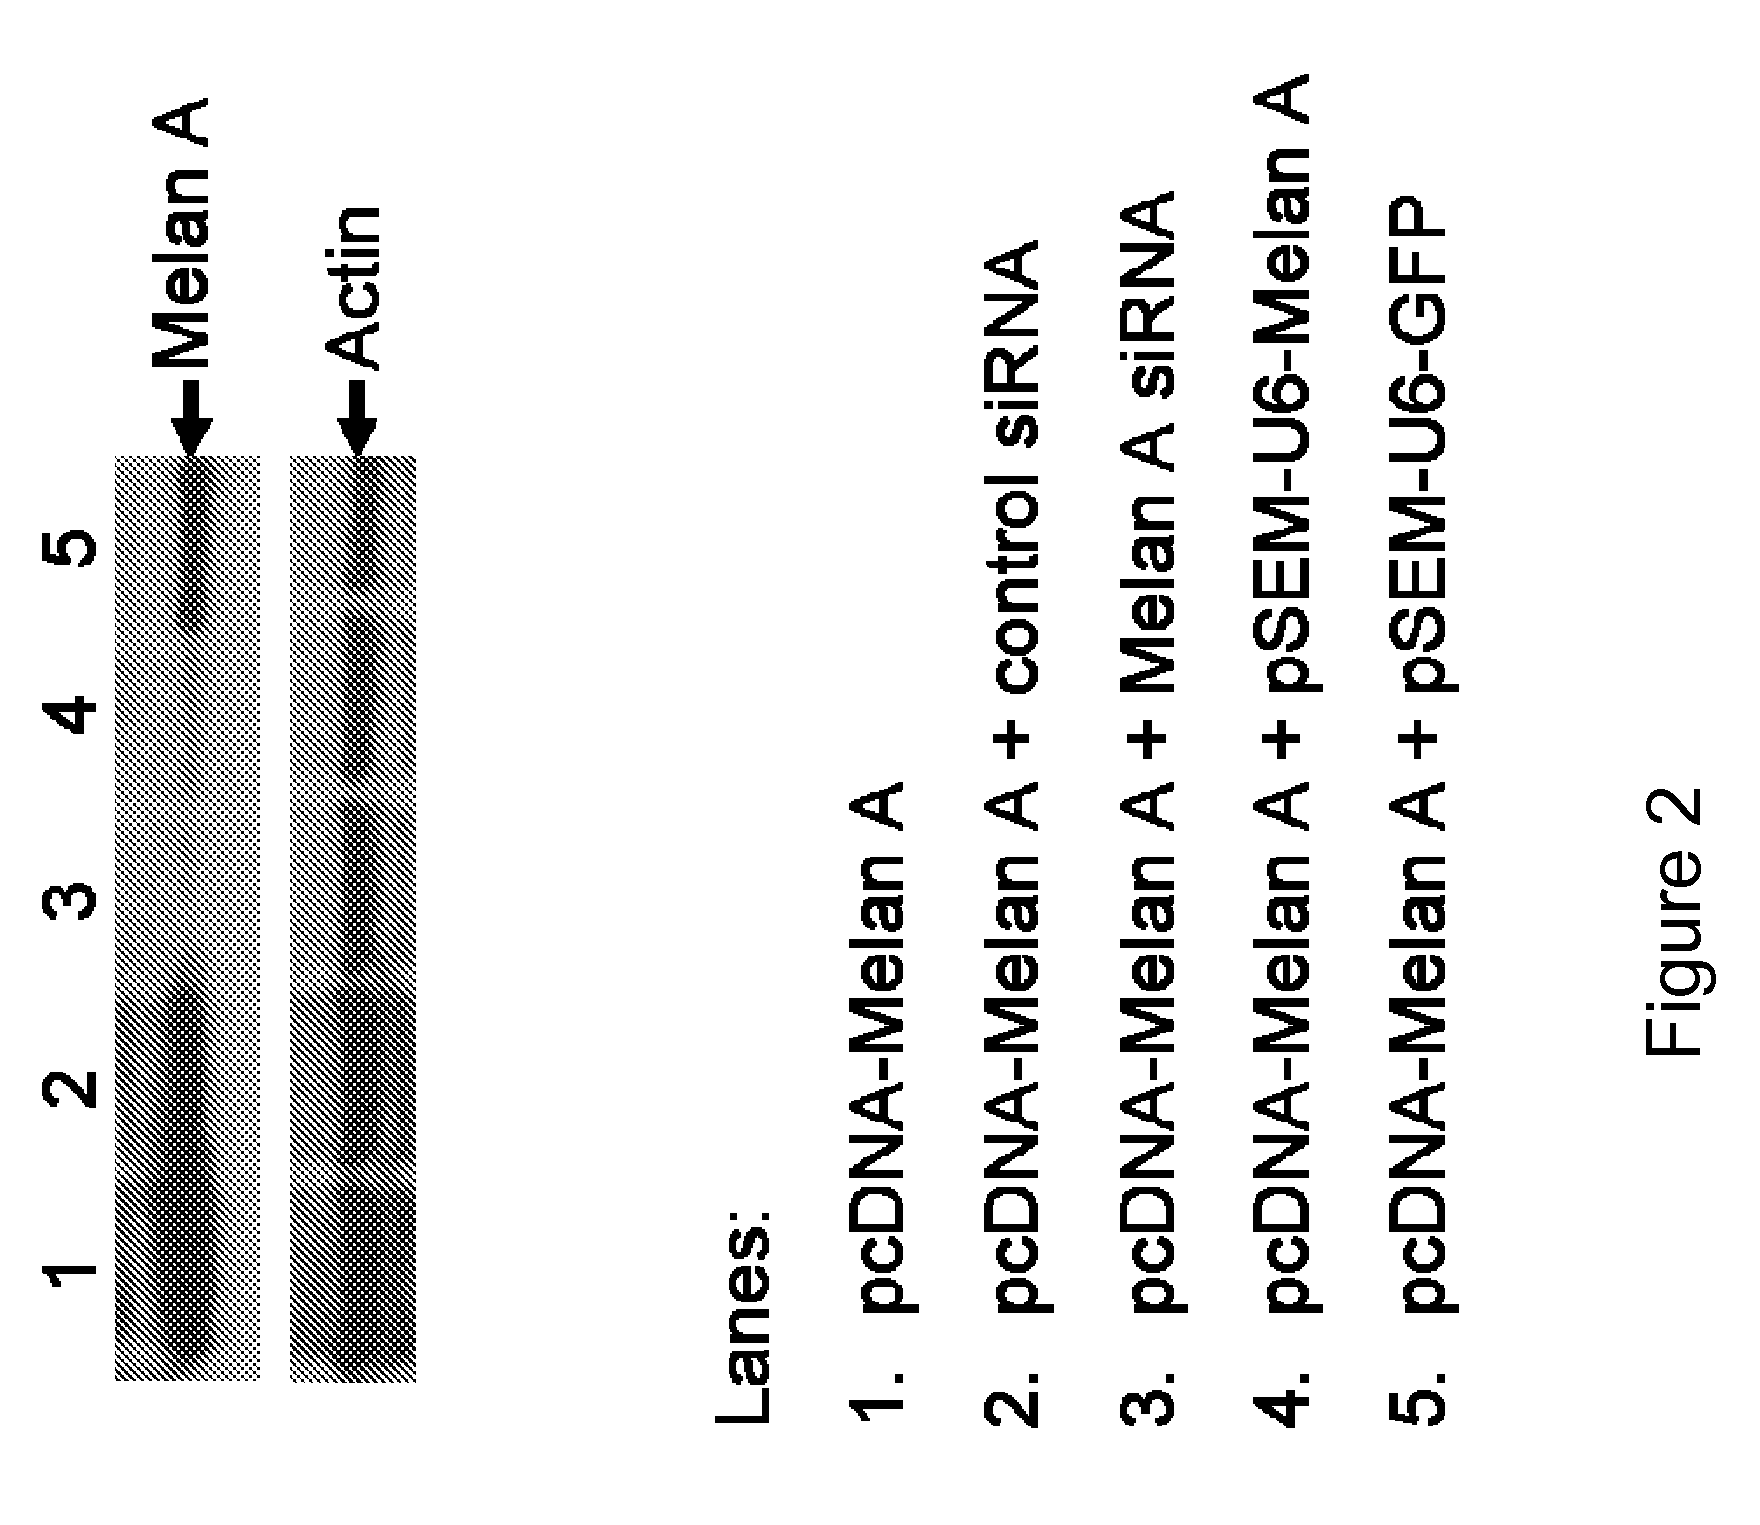 Multicistronic vectors and methods for their design